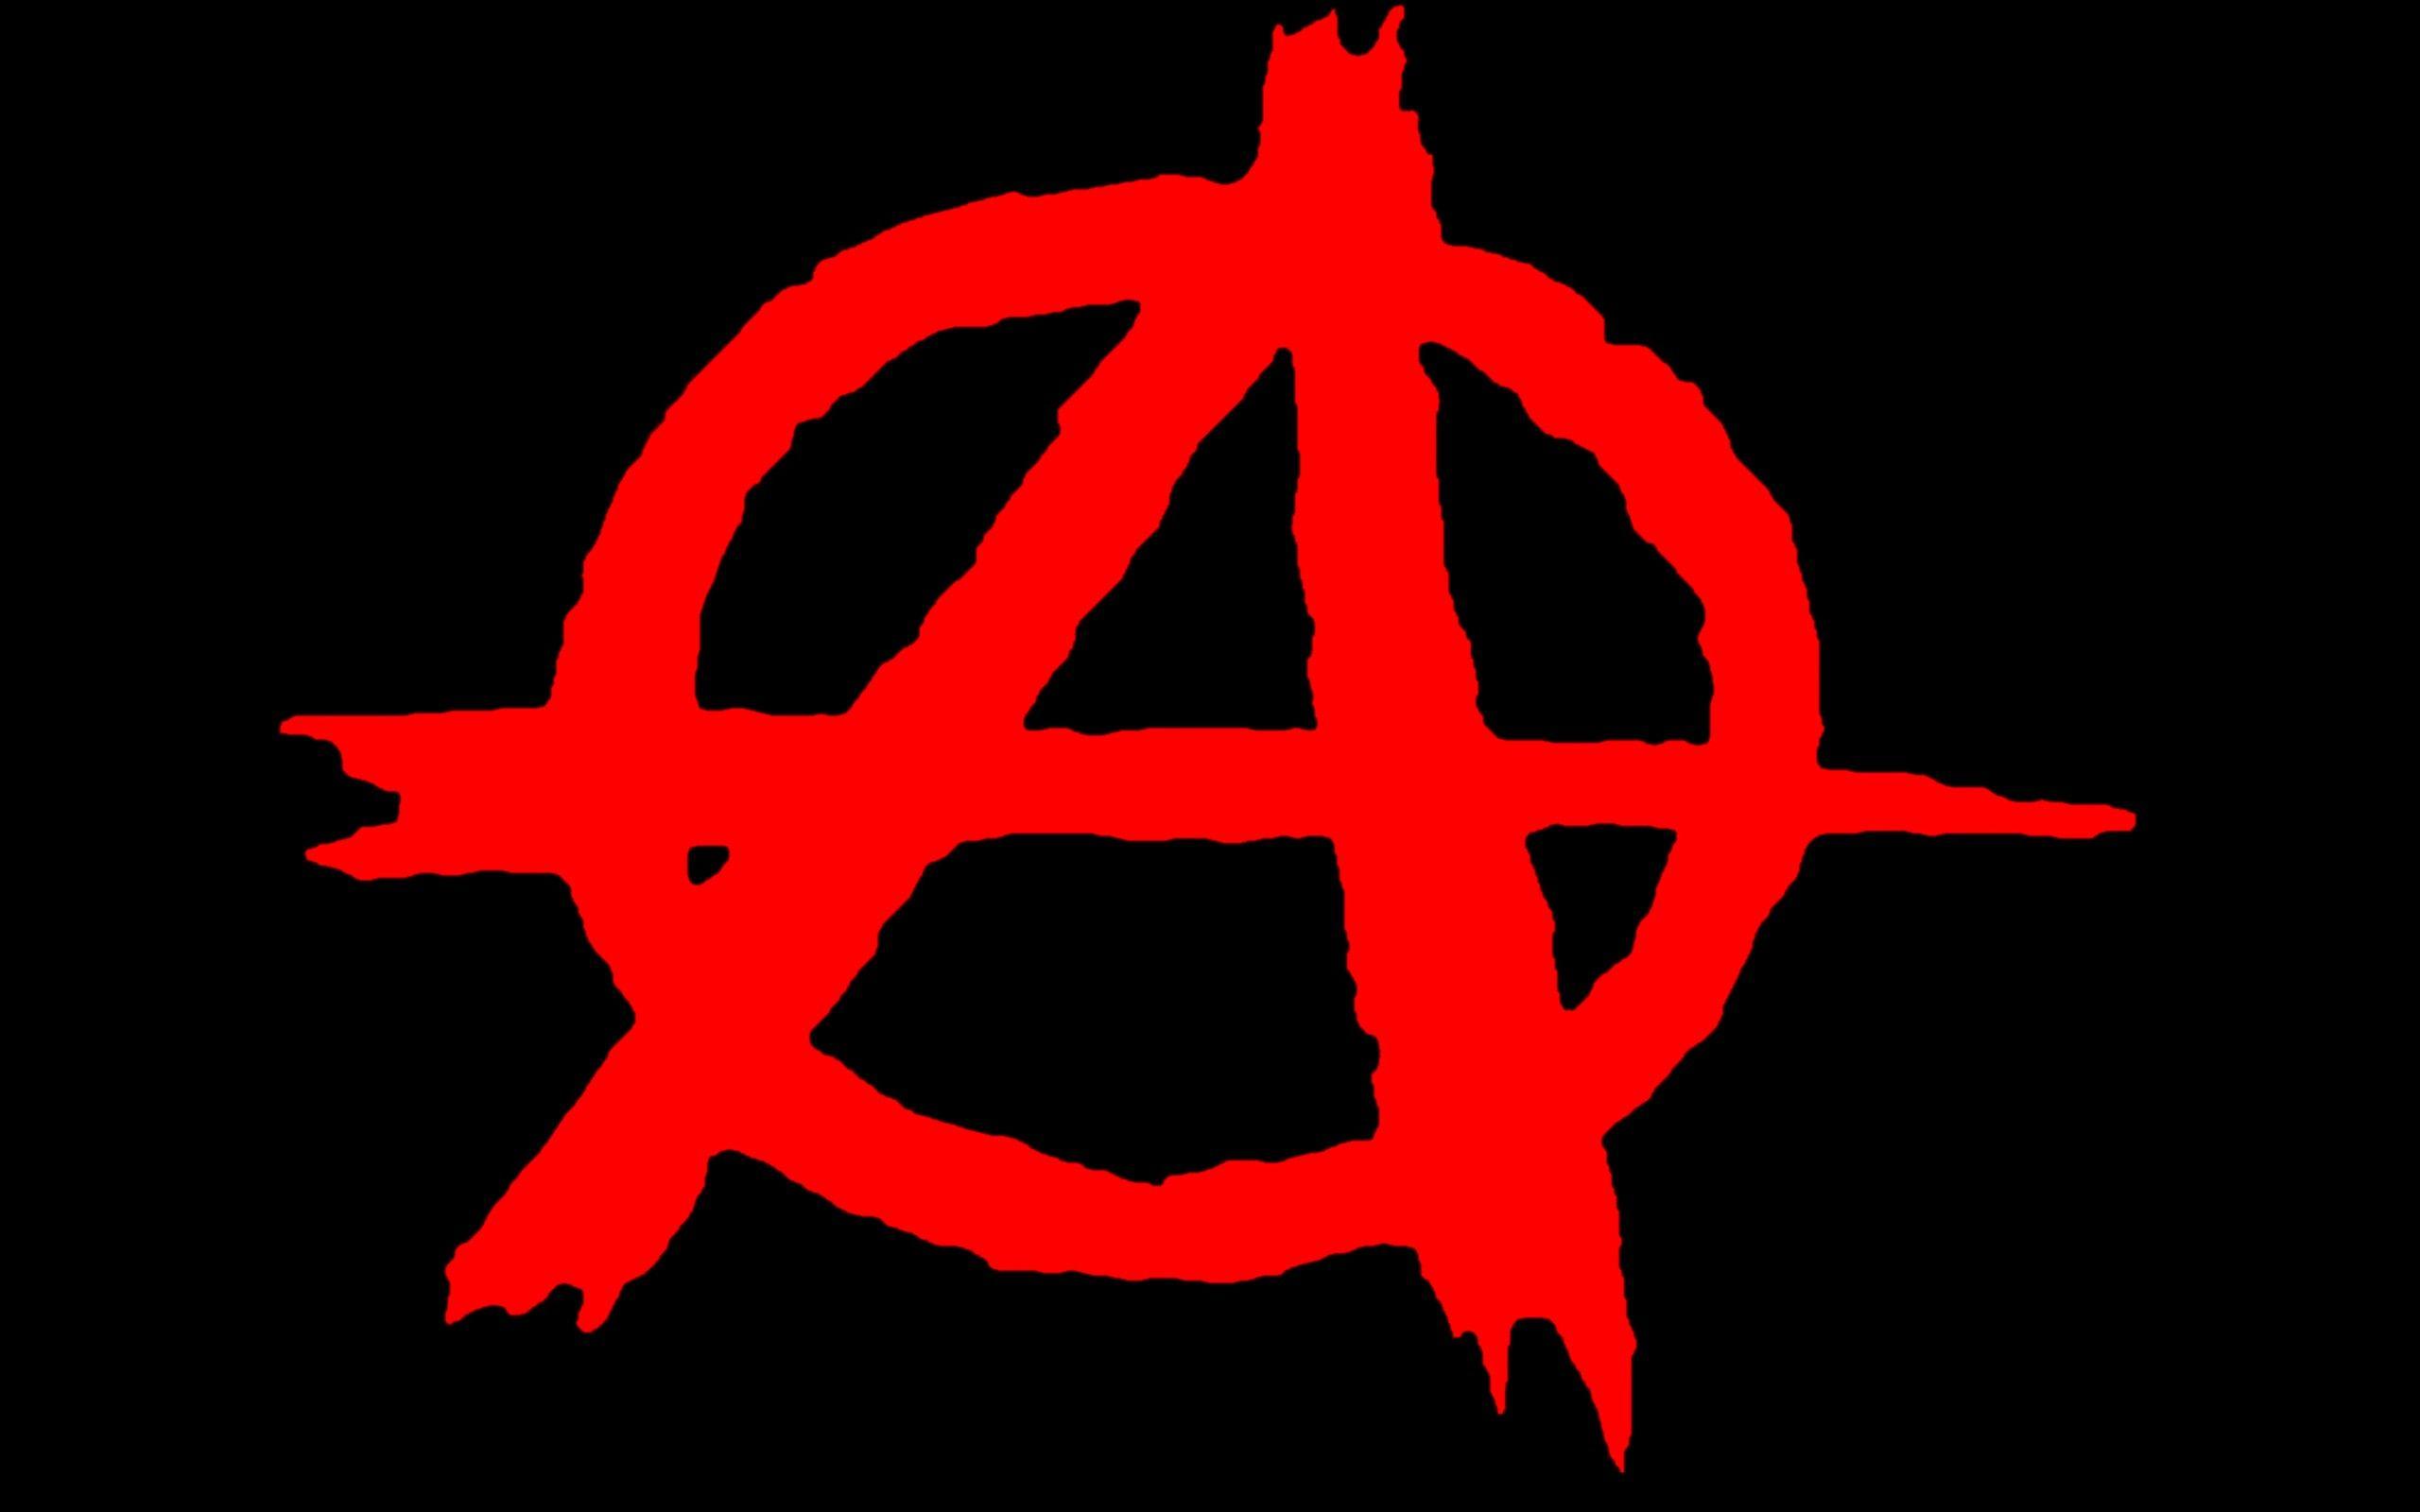 Signs symbol peace anarchy freedom sign anarchism wallpaper